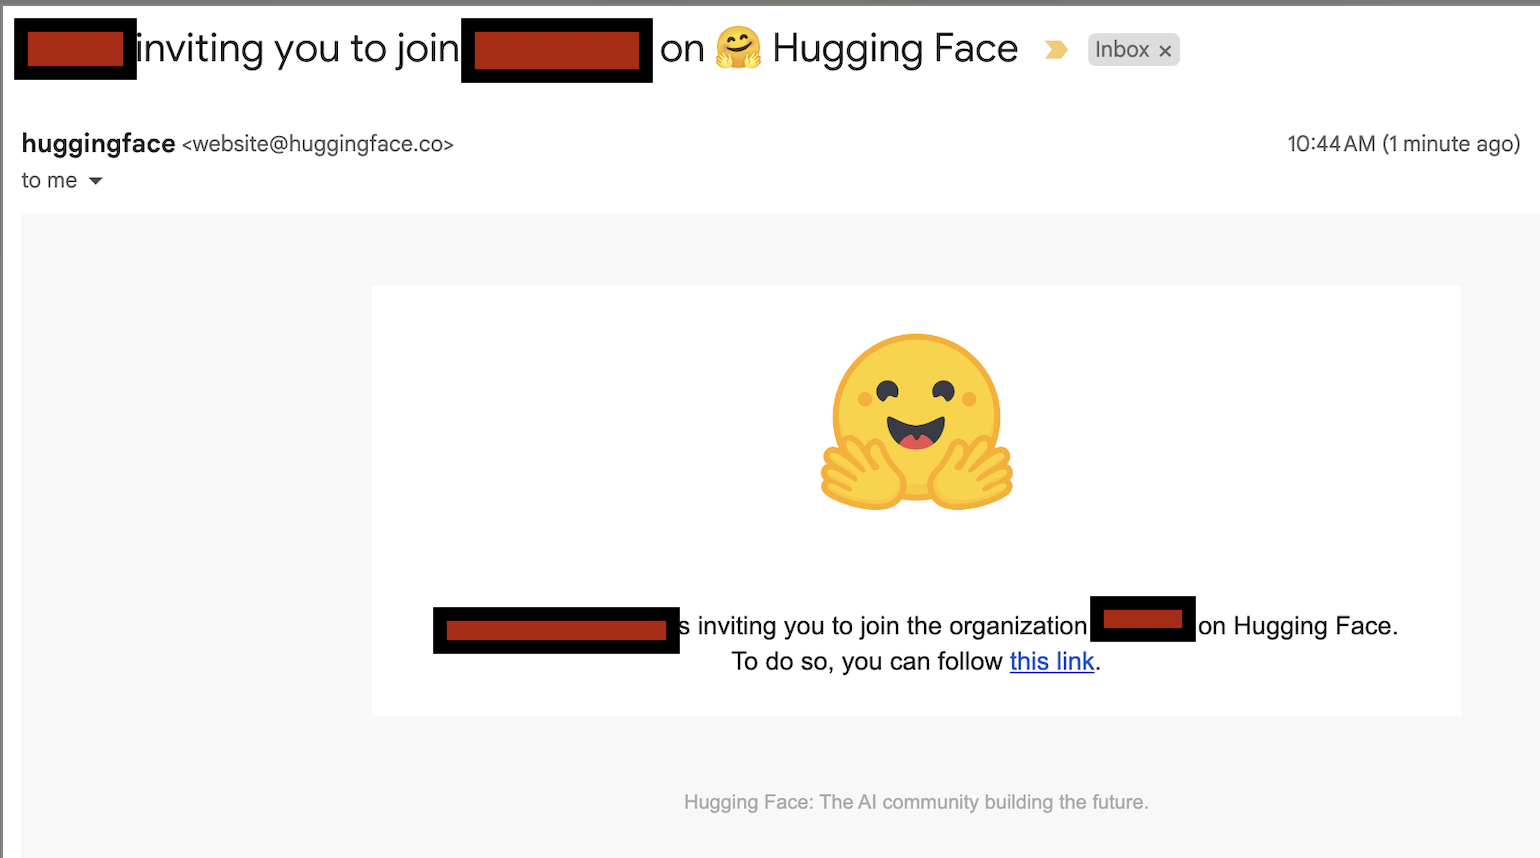 pic of invite on huggingface